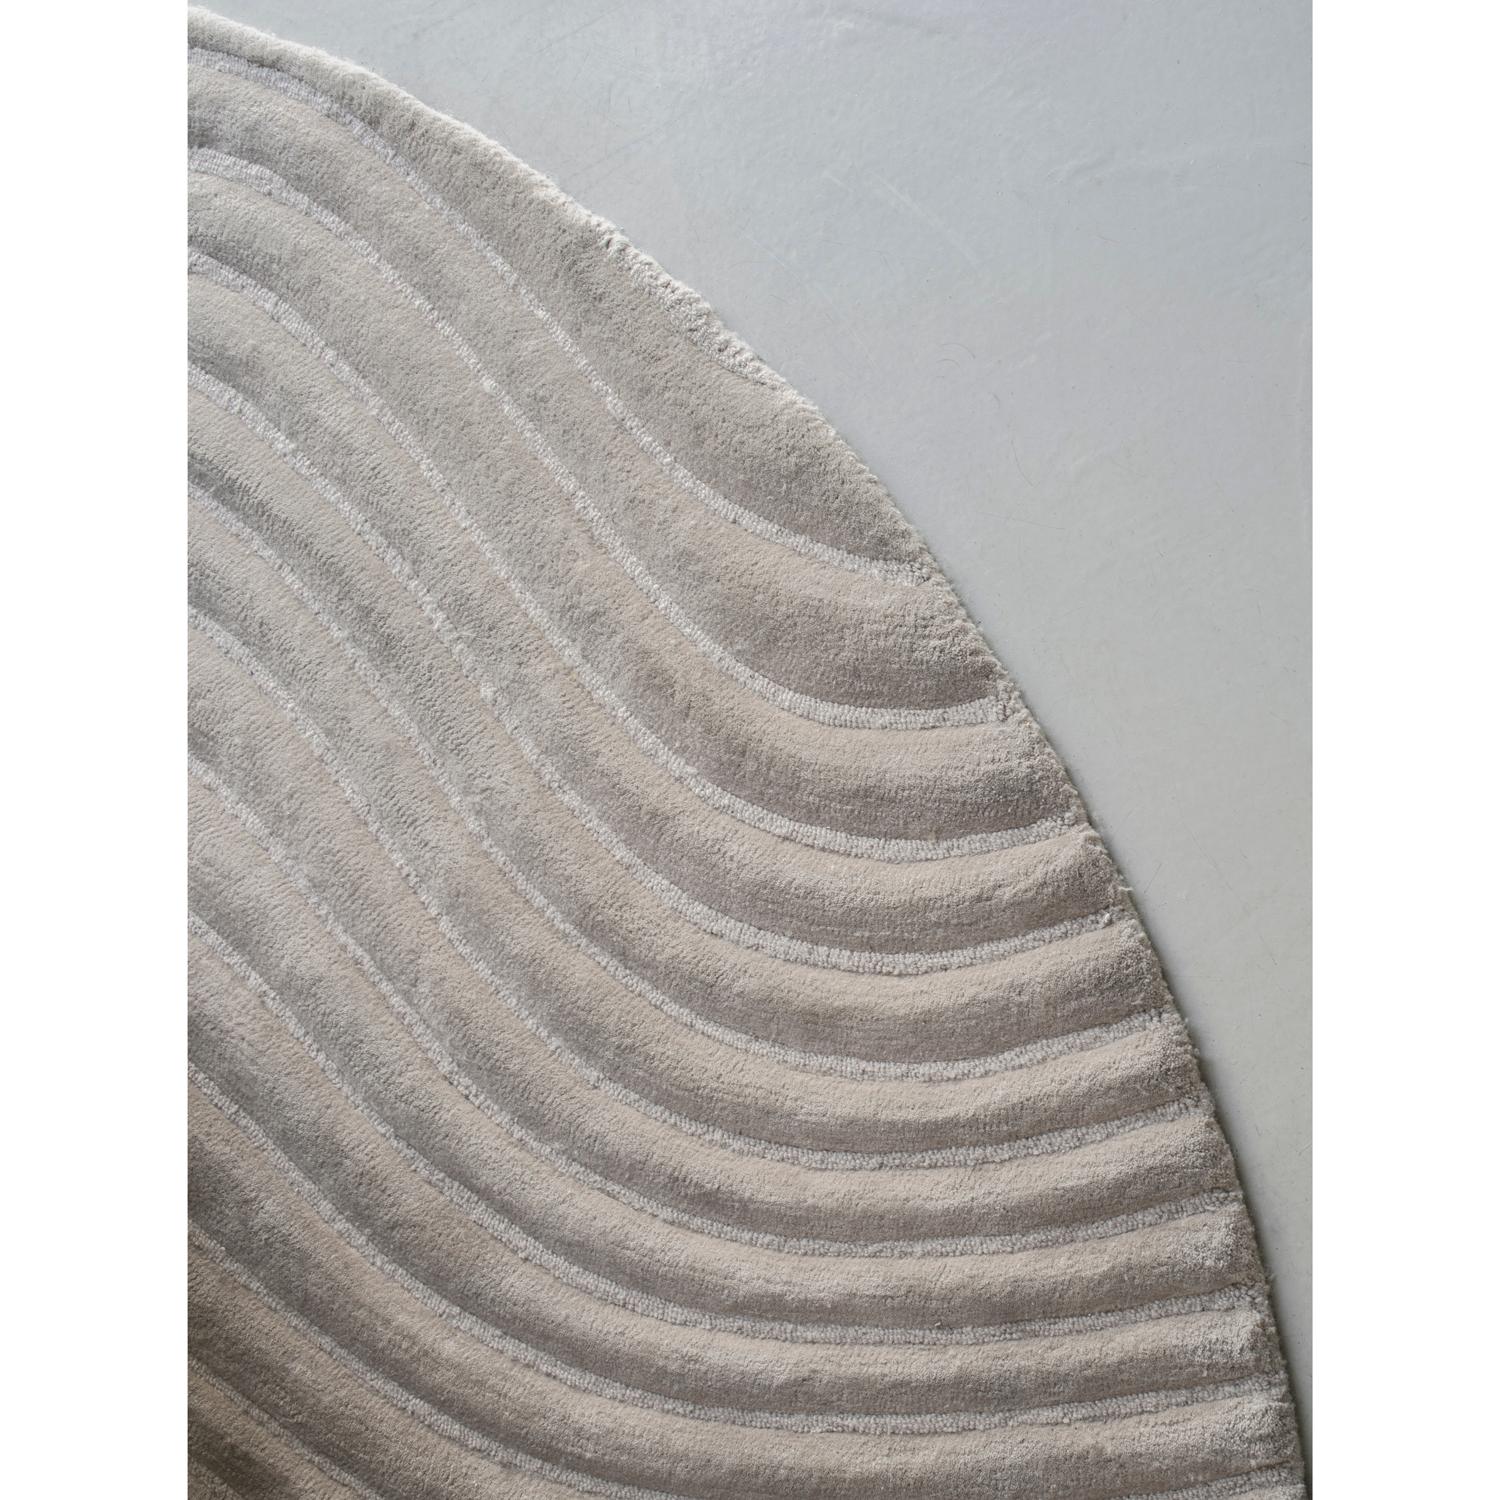 Indian 21st Cent Living Room Waves Wool Warm Grey Rug by Deanna Comellini ø 240 cm For Sale